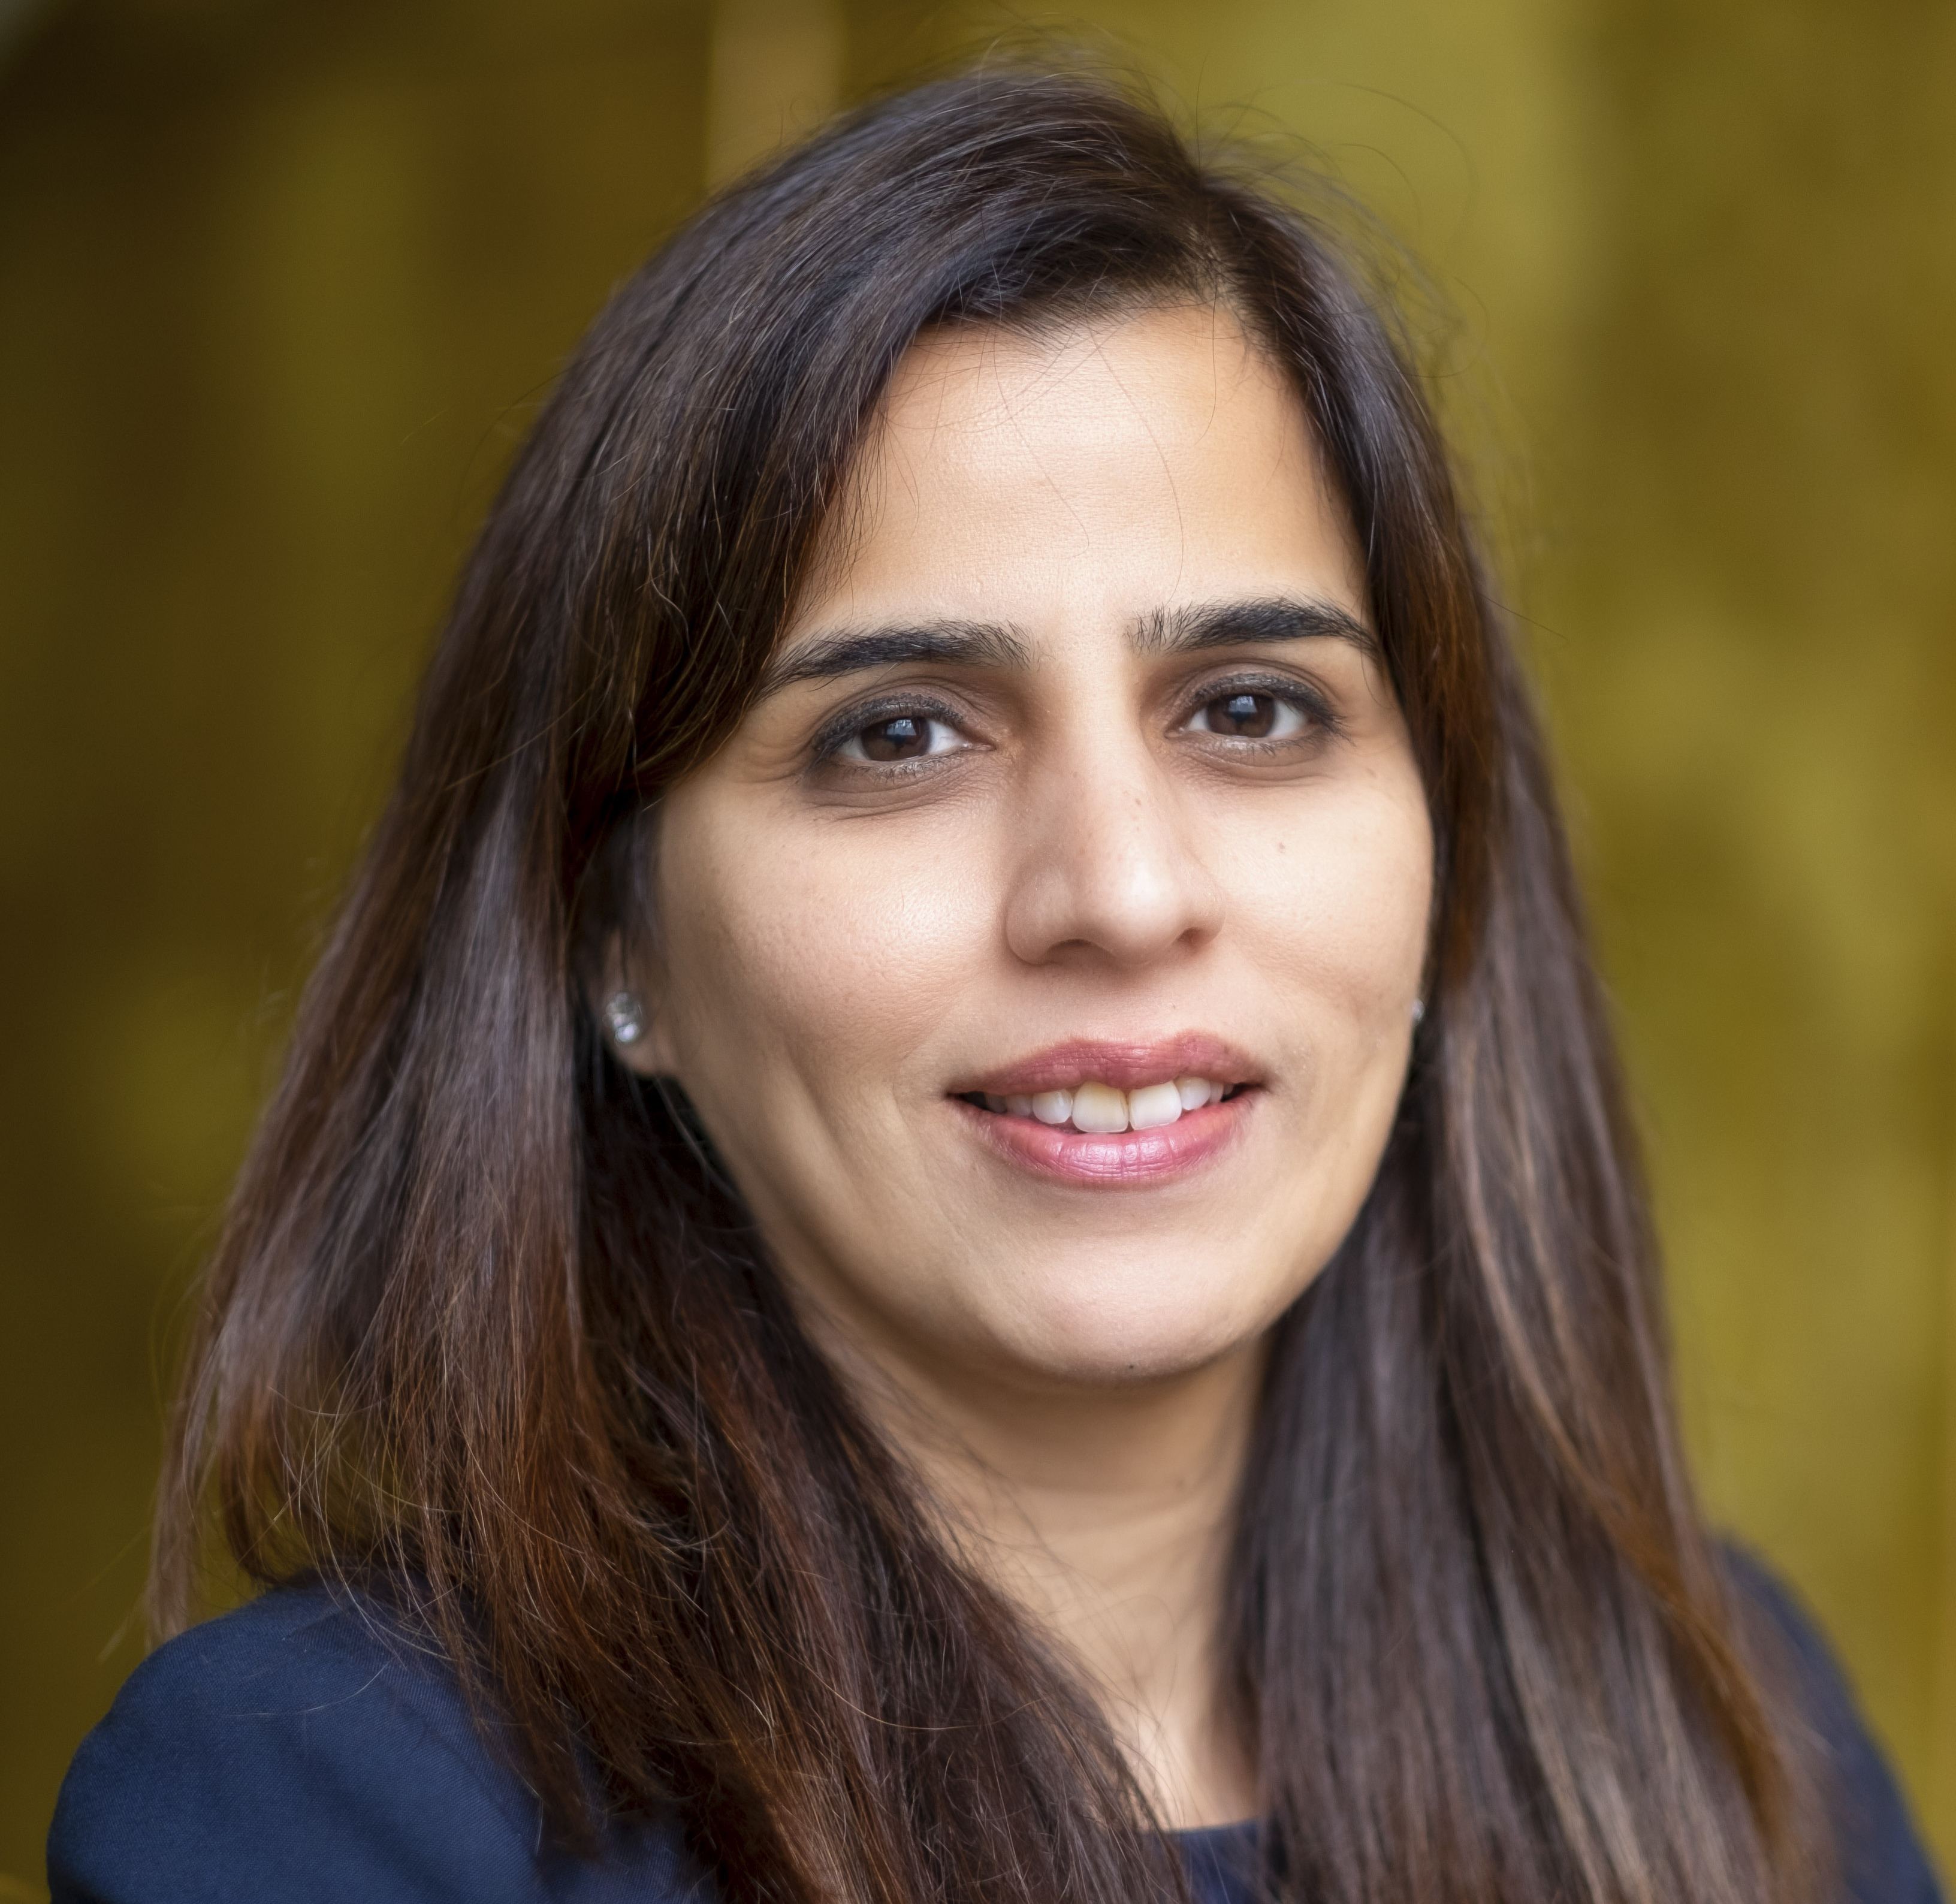 Ruchi Tushir, Vice President and General Manager of Wolters Kluwer Global Growth Markets India